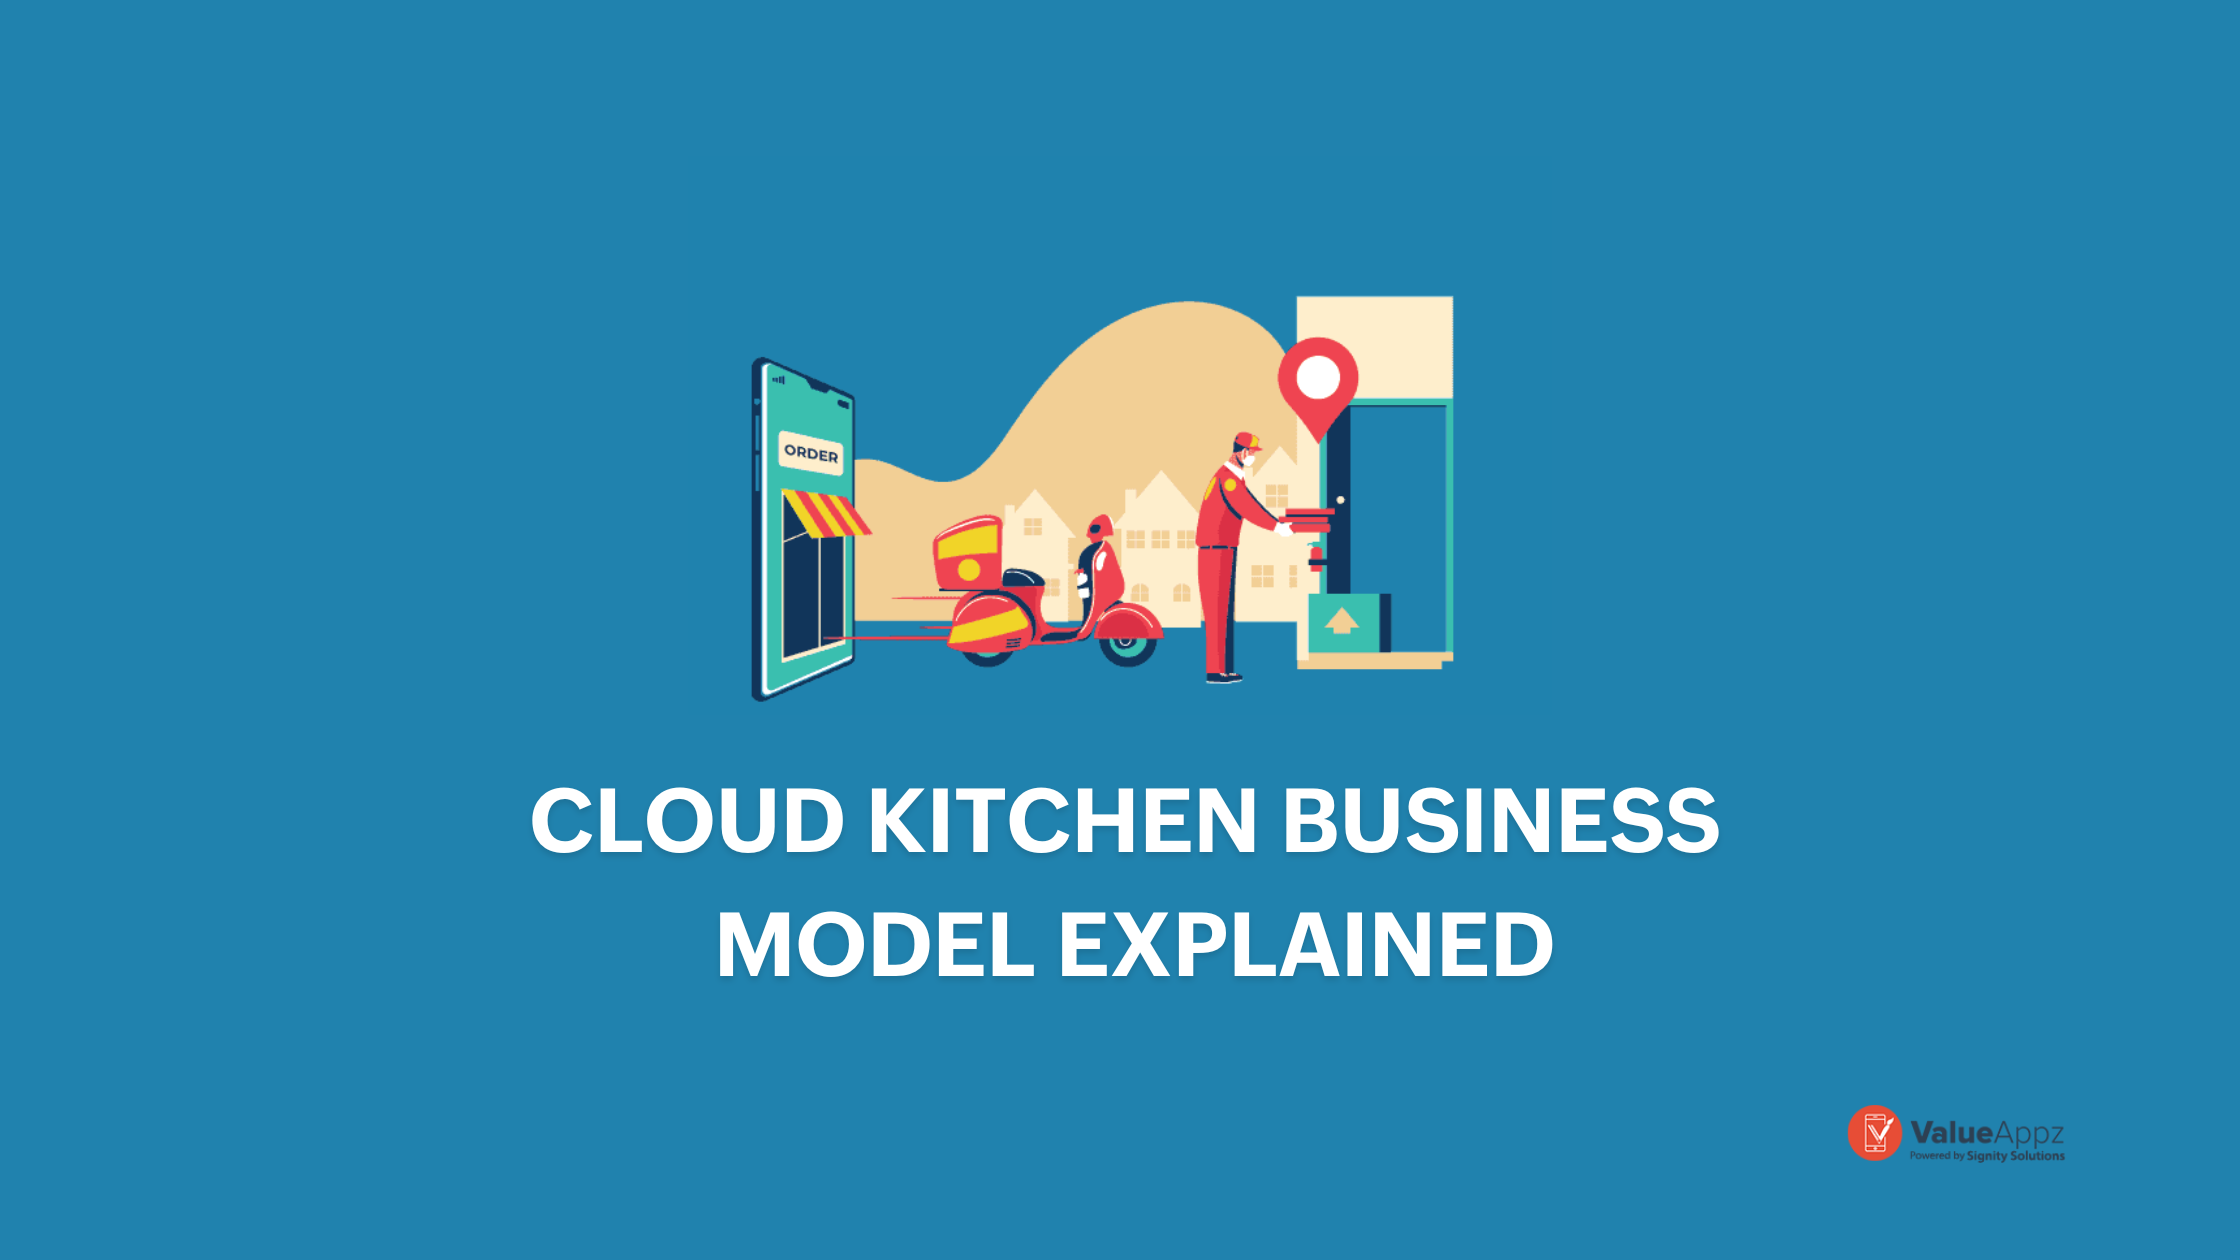 How Cloud Kitchen Business Models Have Transformed the Food Delivery Industry